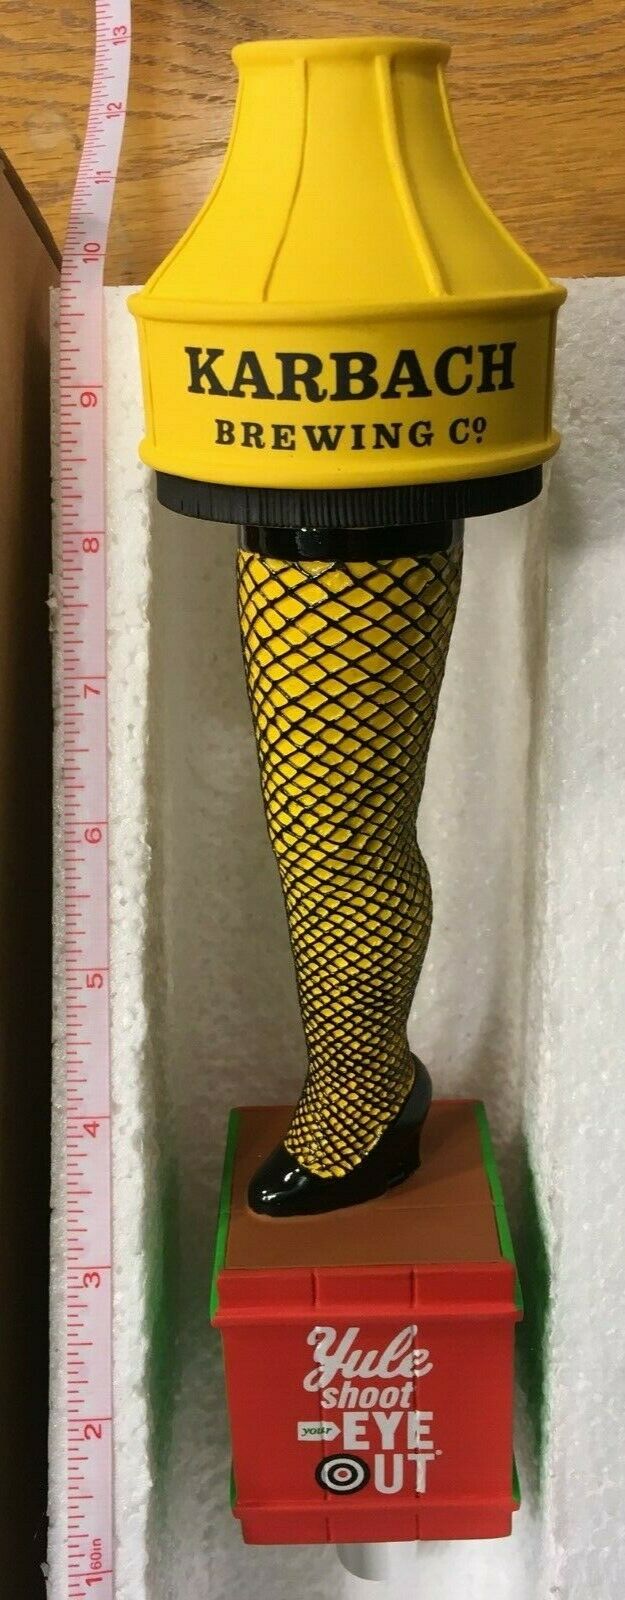 Karbach Brewing Yule Shoot Your Eye Out Beer Tap Handle Brand New in Box